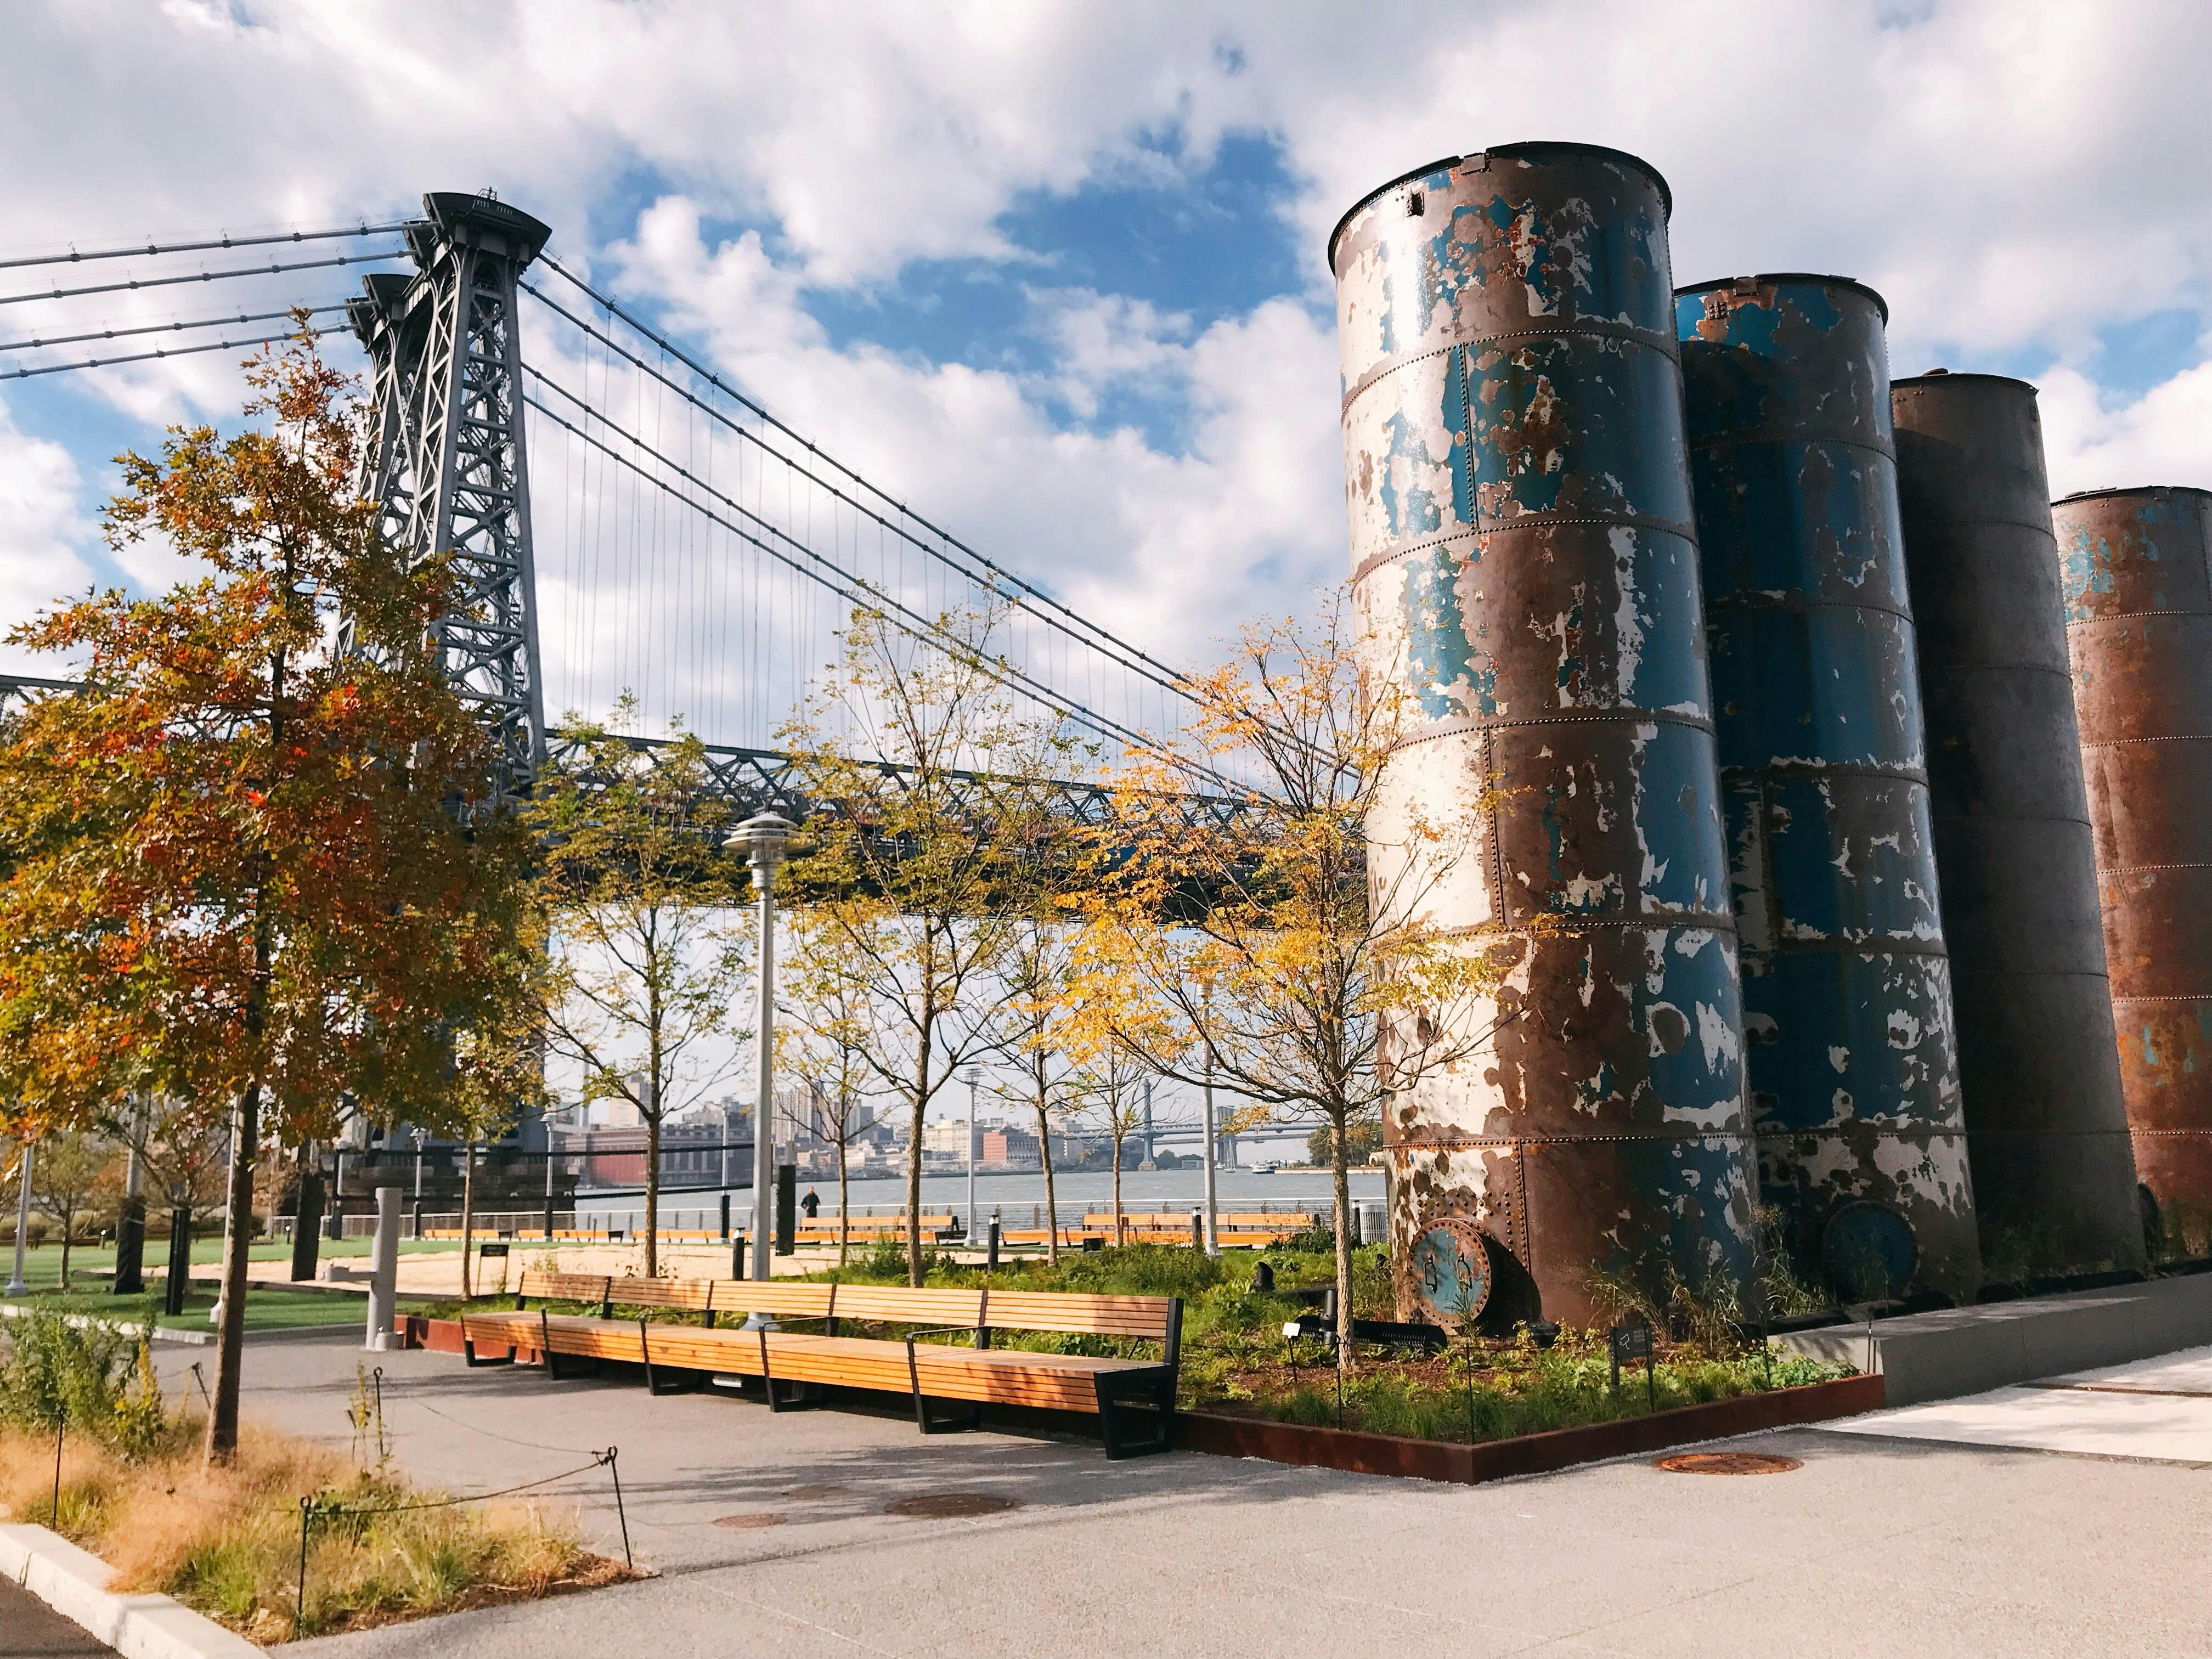 A local's guide to Williamsburg, Brooklyn, NYC - Urban Adventures